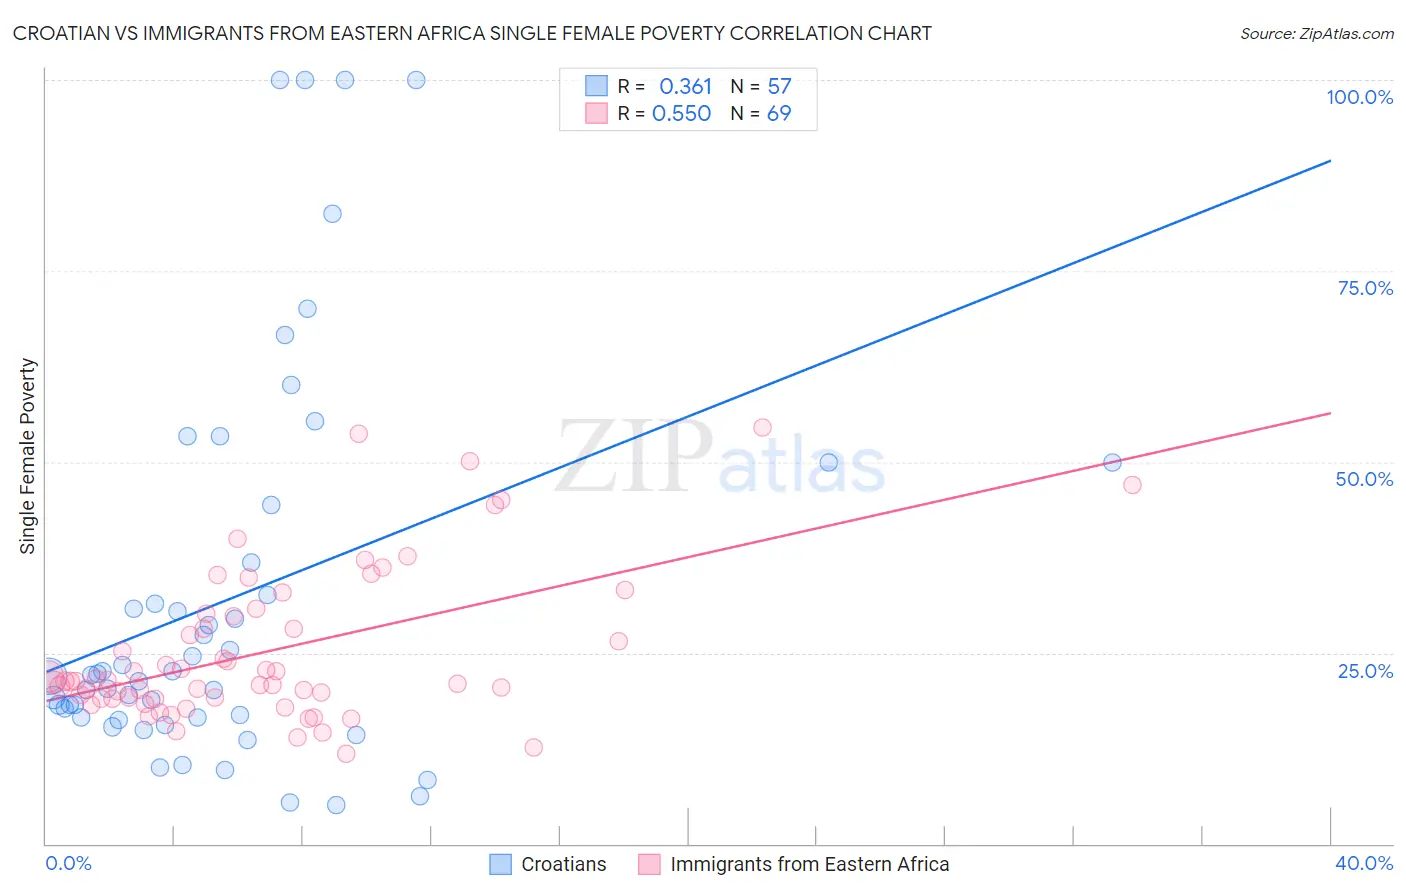 Croatian vs Immigrants from Eastern Africa Single Female Poverty